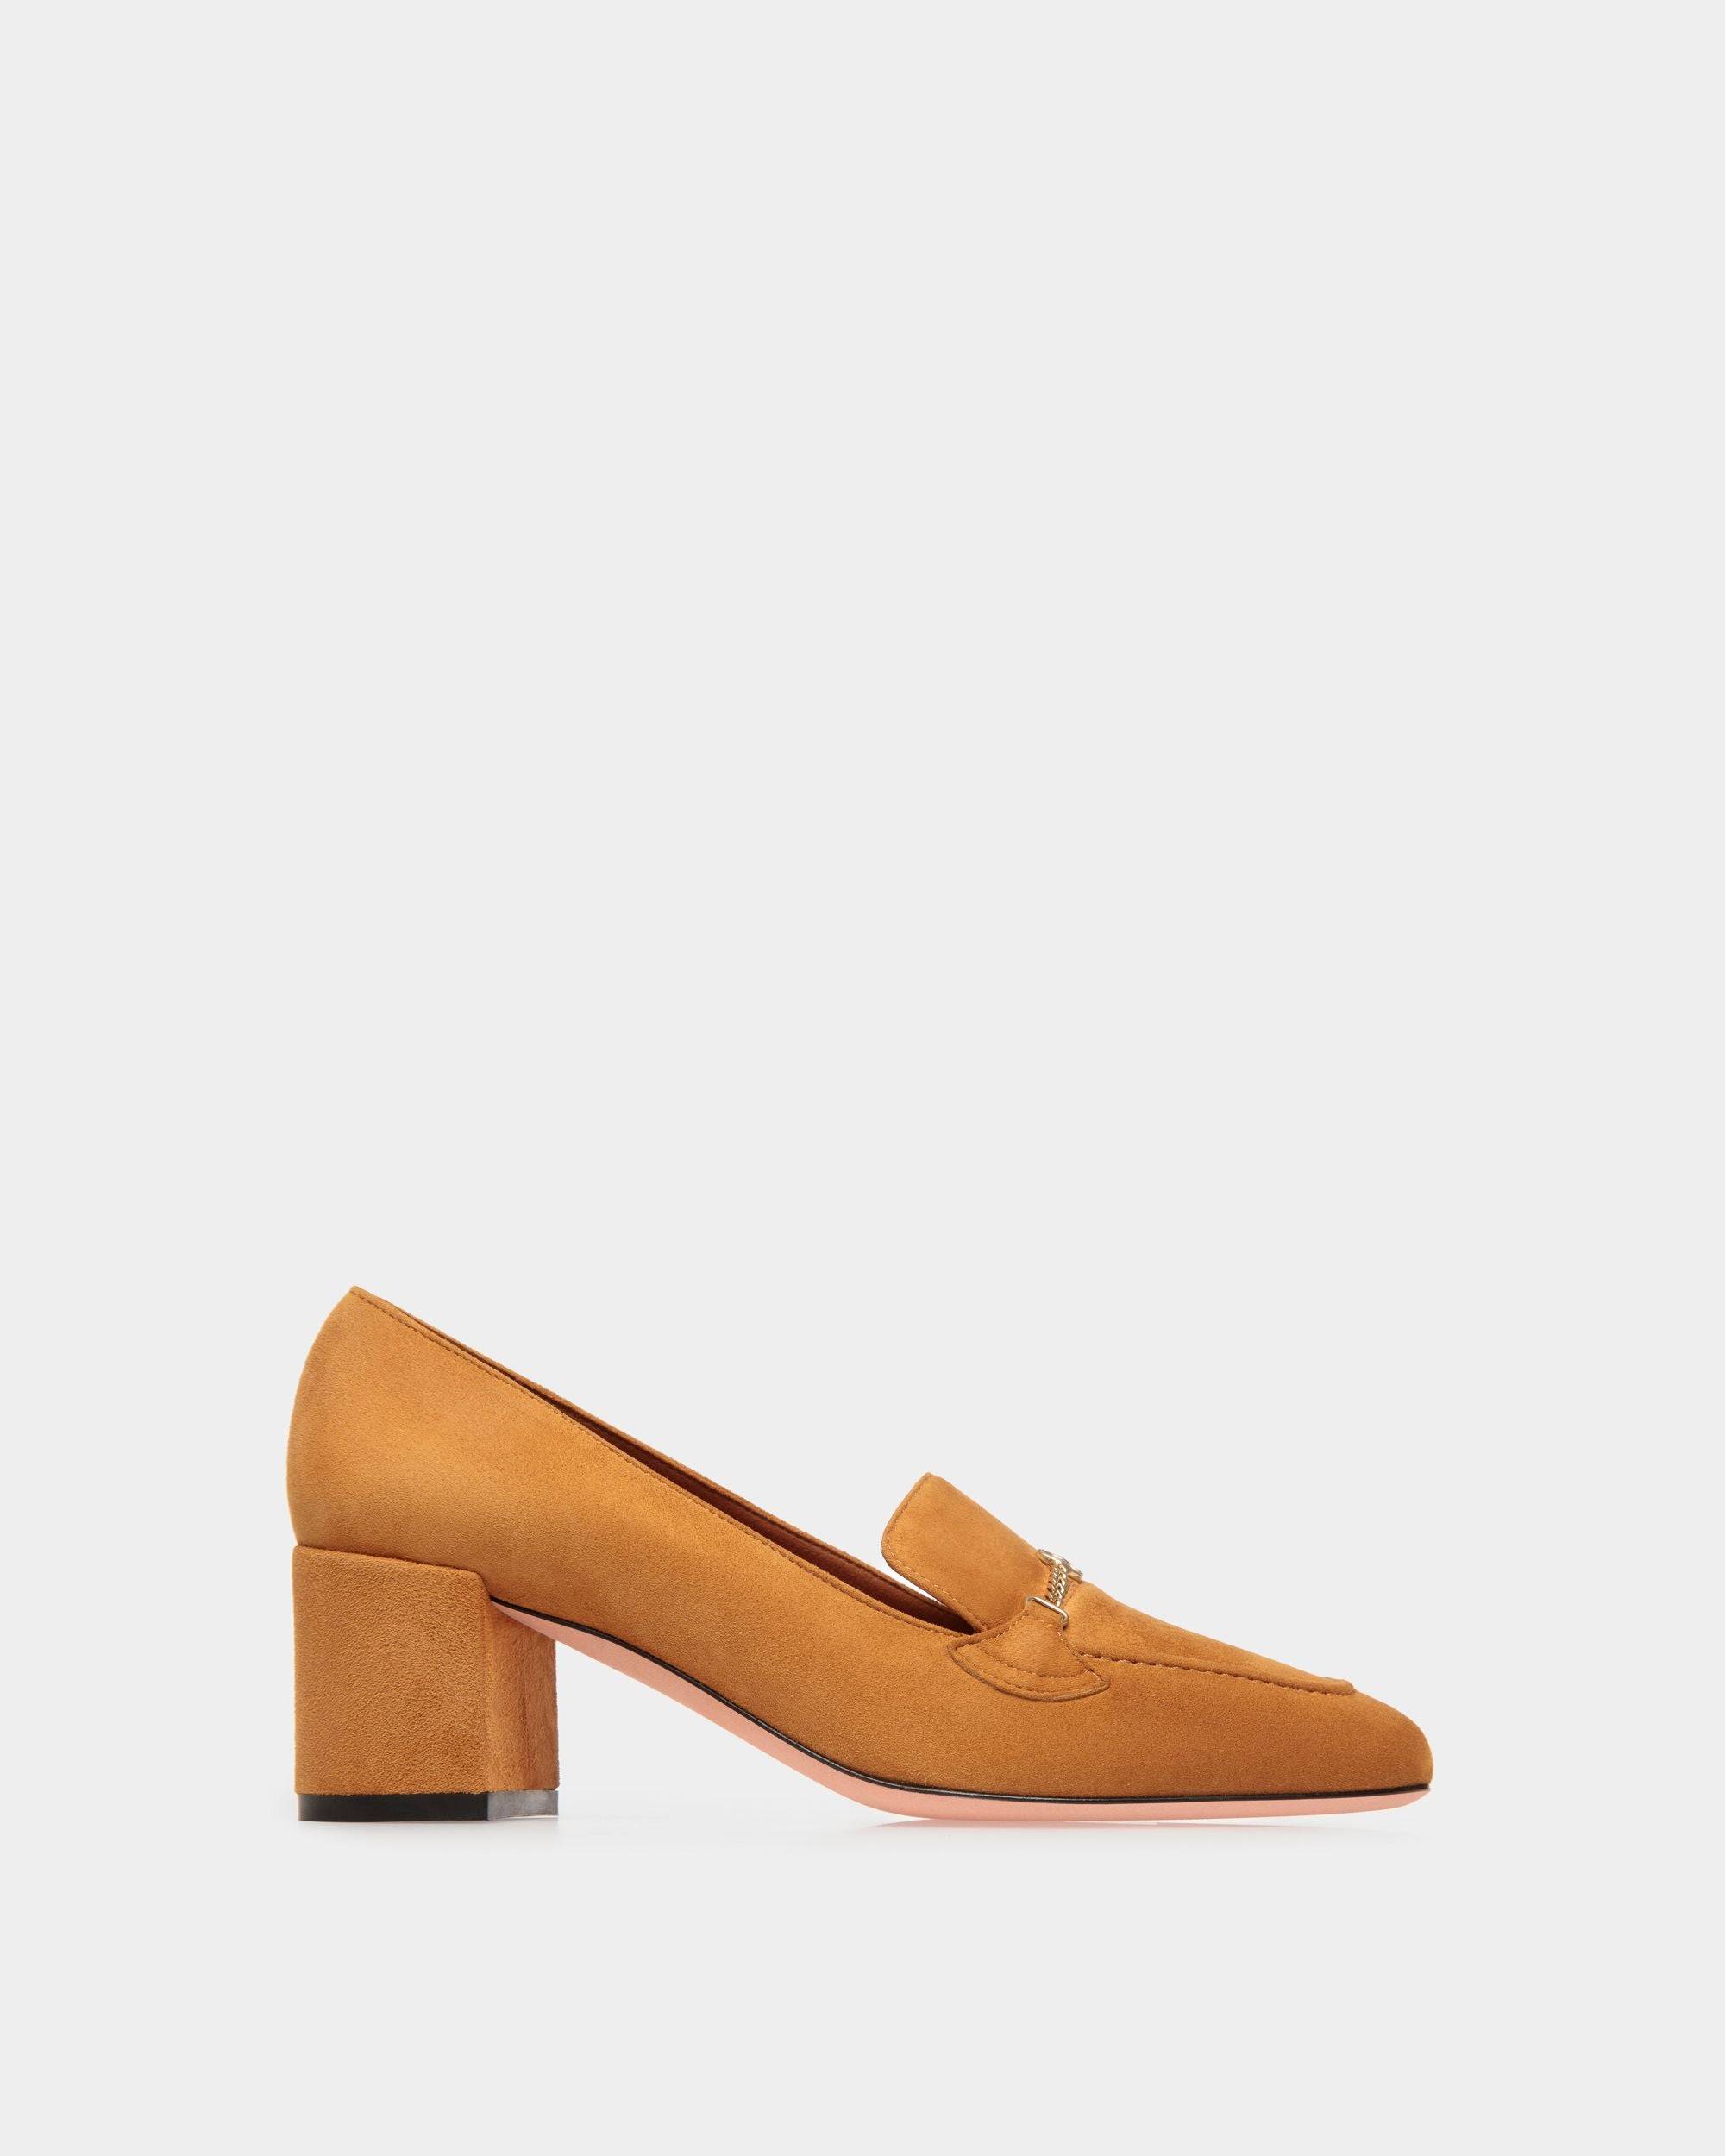 Women's Daily Emblem Pump in Brown Suede | Bally | Still Life Side